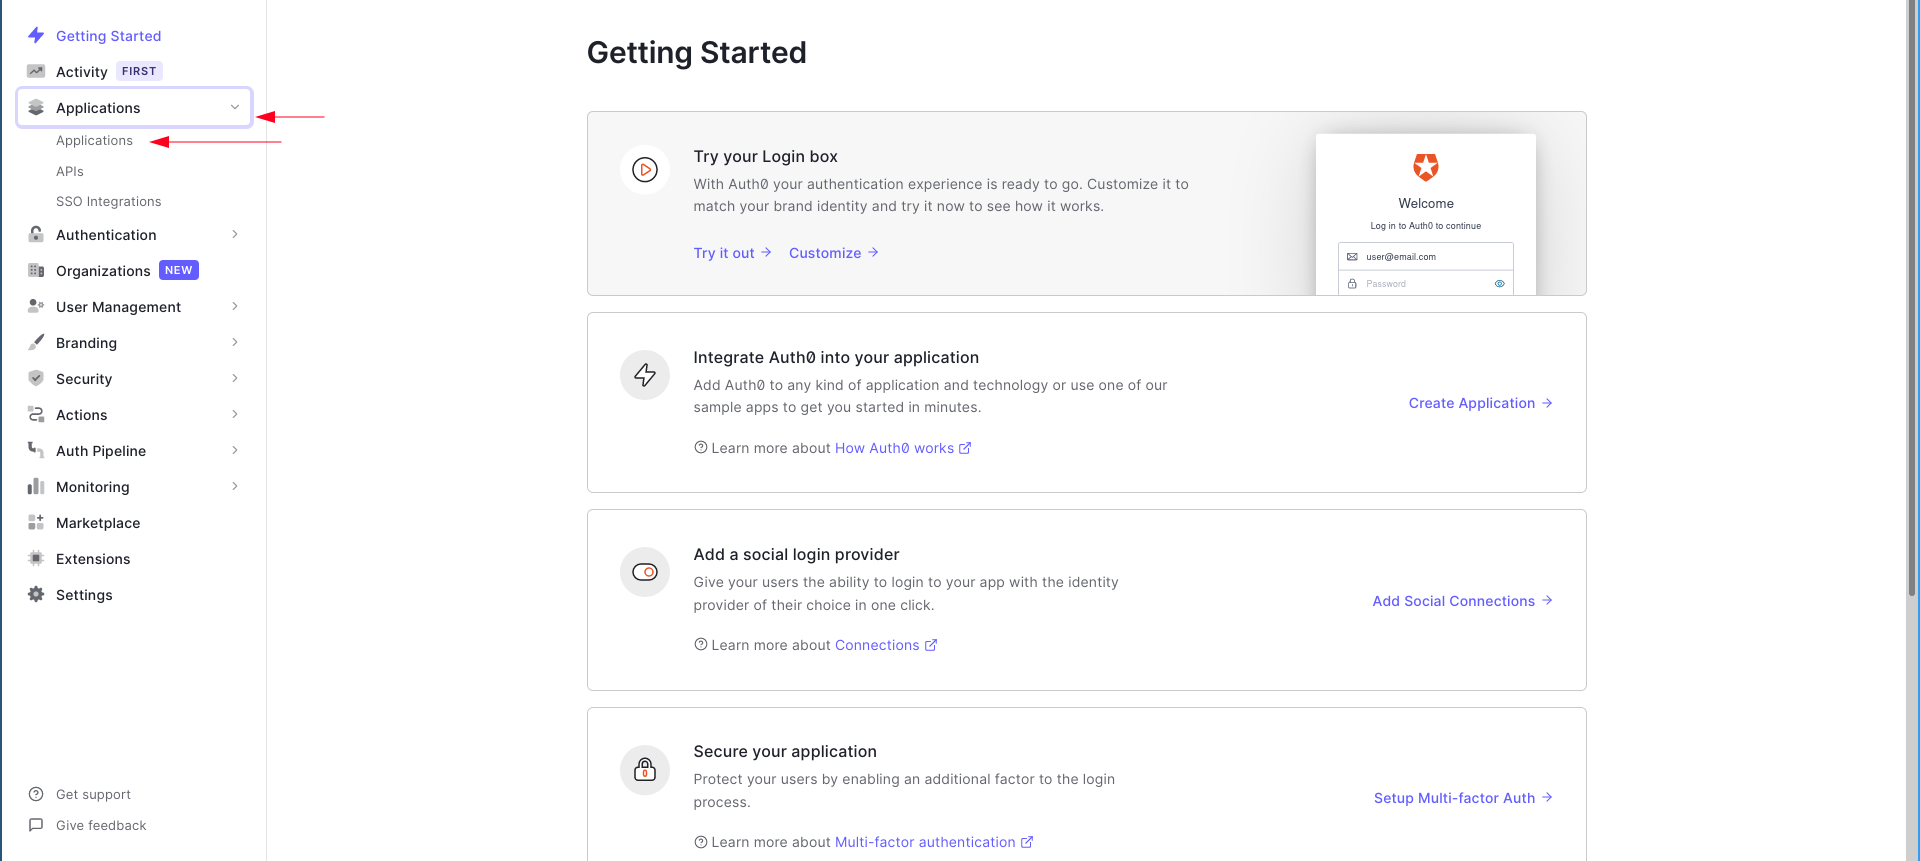 Selecting "Applications" from the left sidebar of Auth0 dashboard after signing up